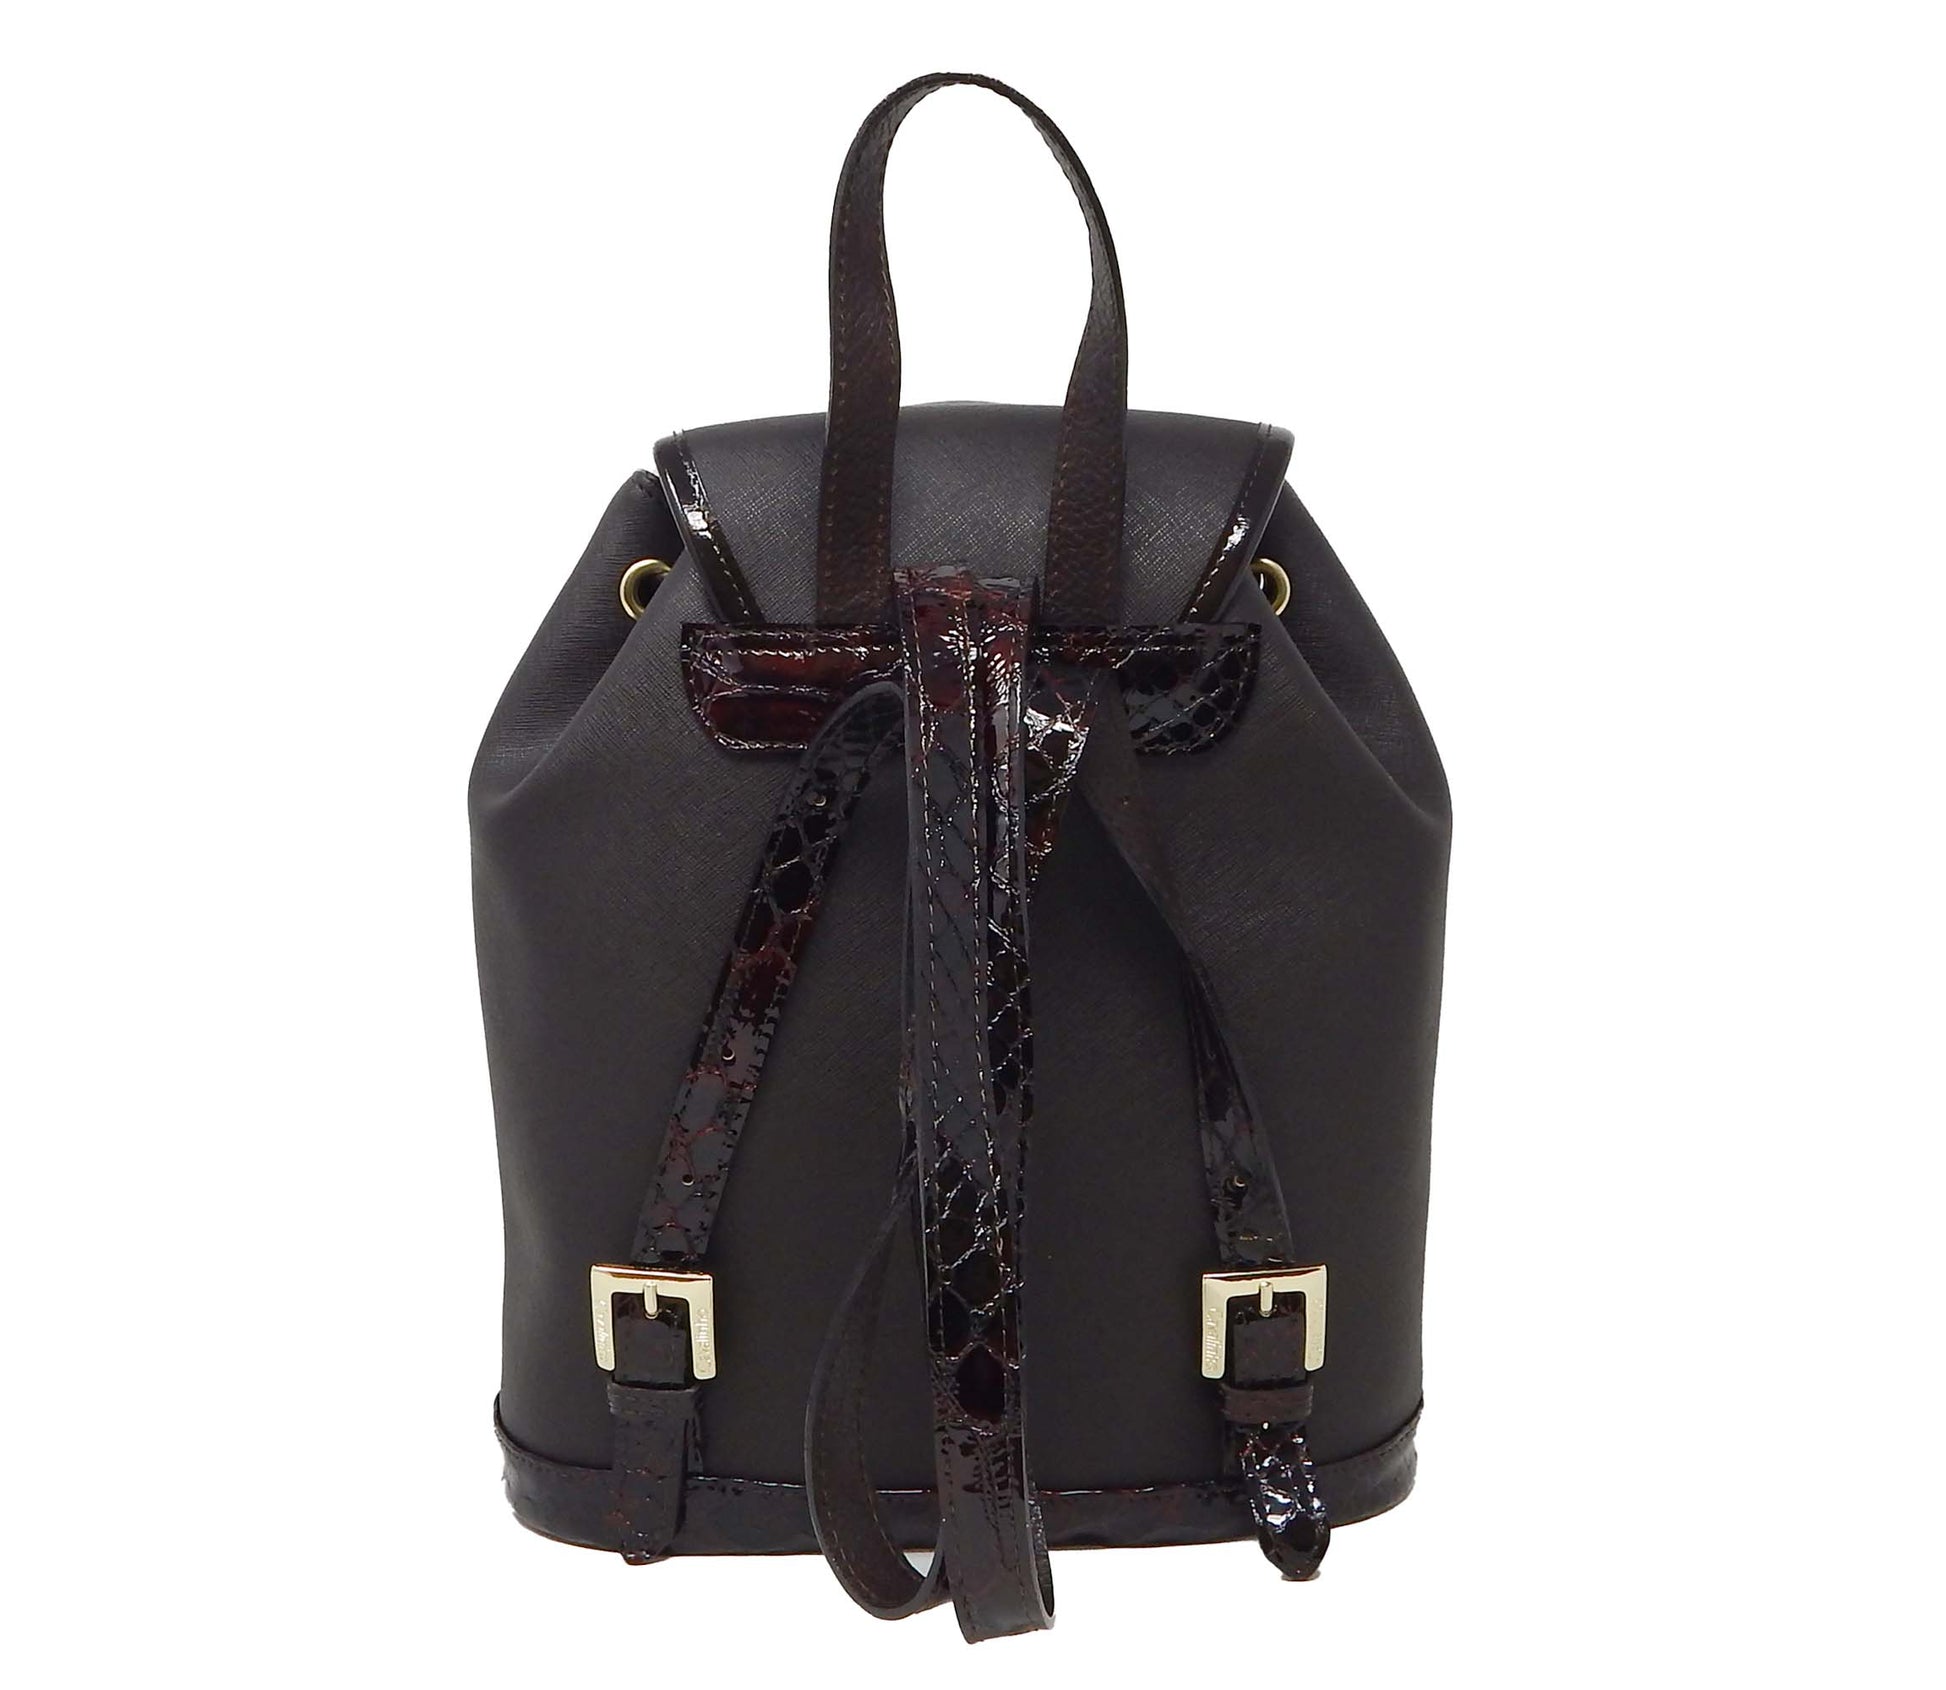 #color_ Brown | Cavalinho Cherry Blossom Backpack - Brown - 18810495.02.99_3